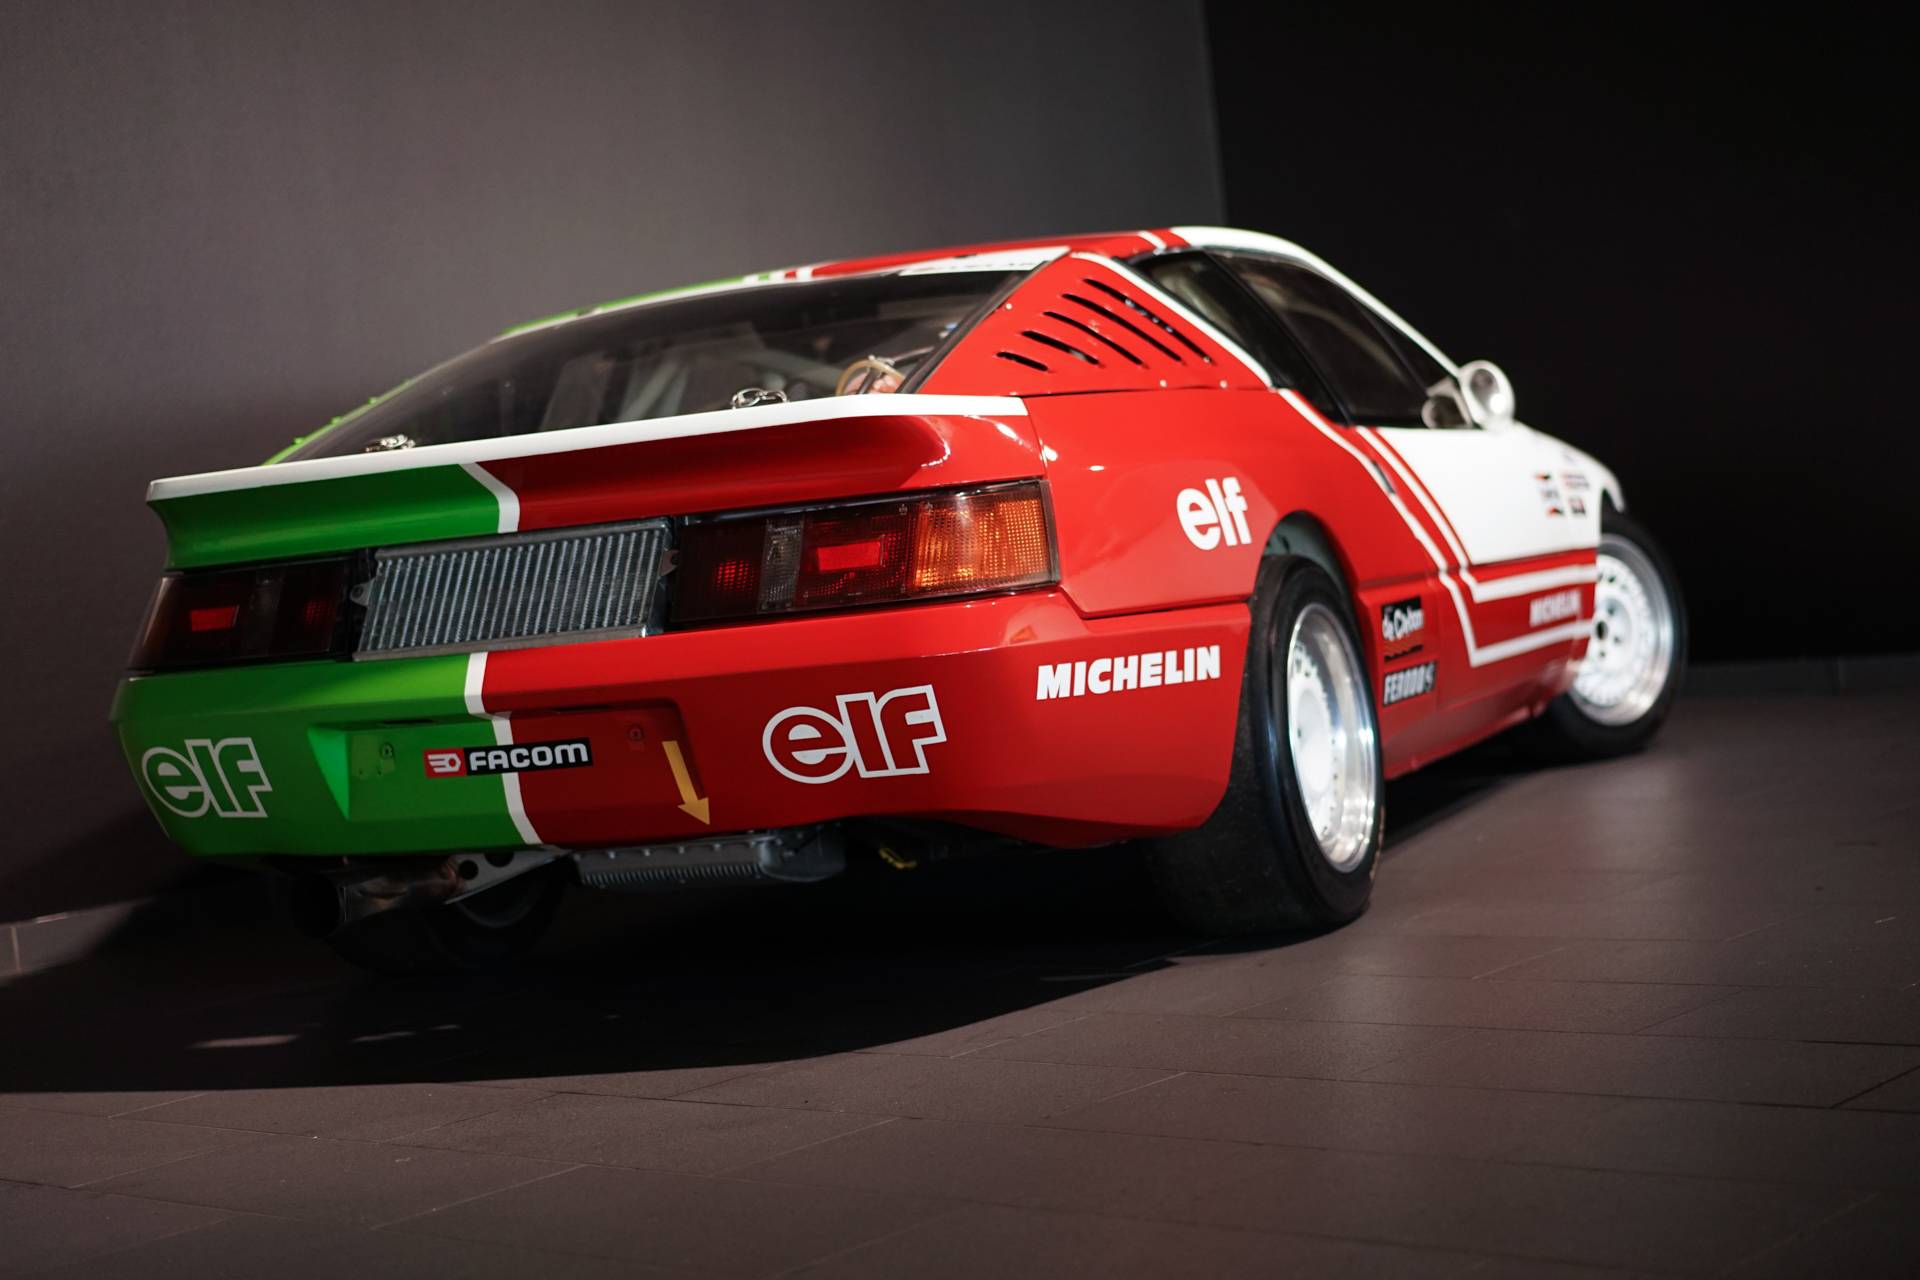 Alpine A610 V6 Turbo Europa Cup 1987 MecanicGallery-classic-trader 